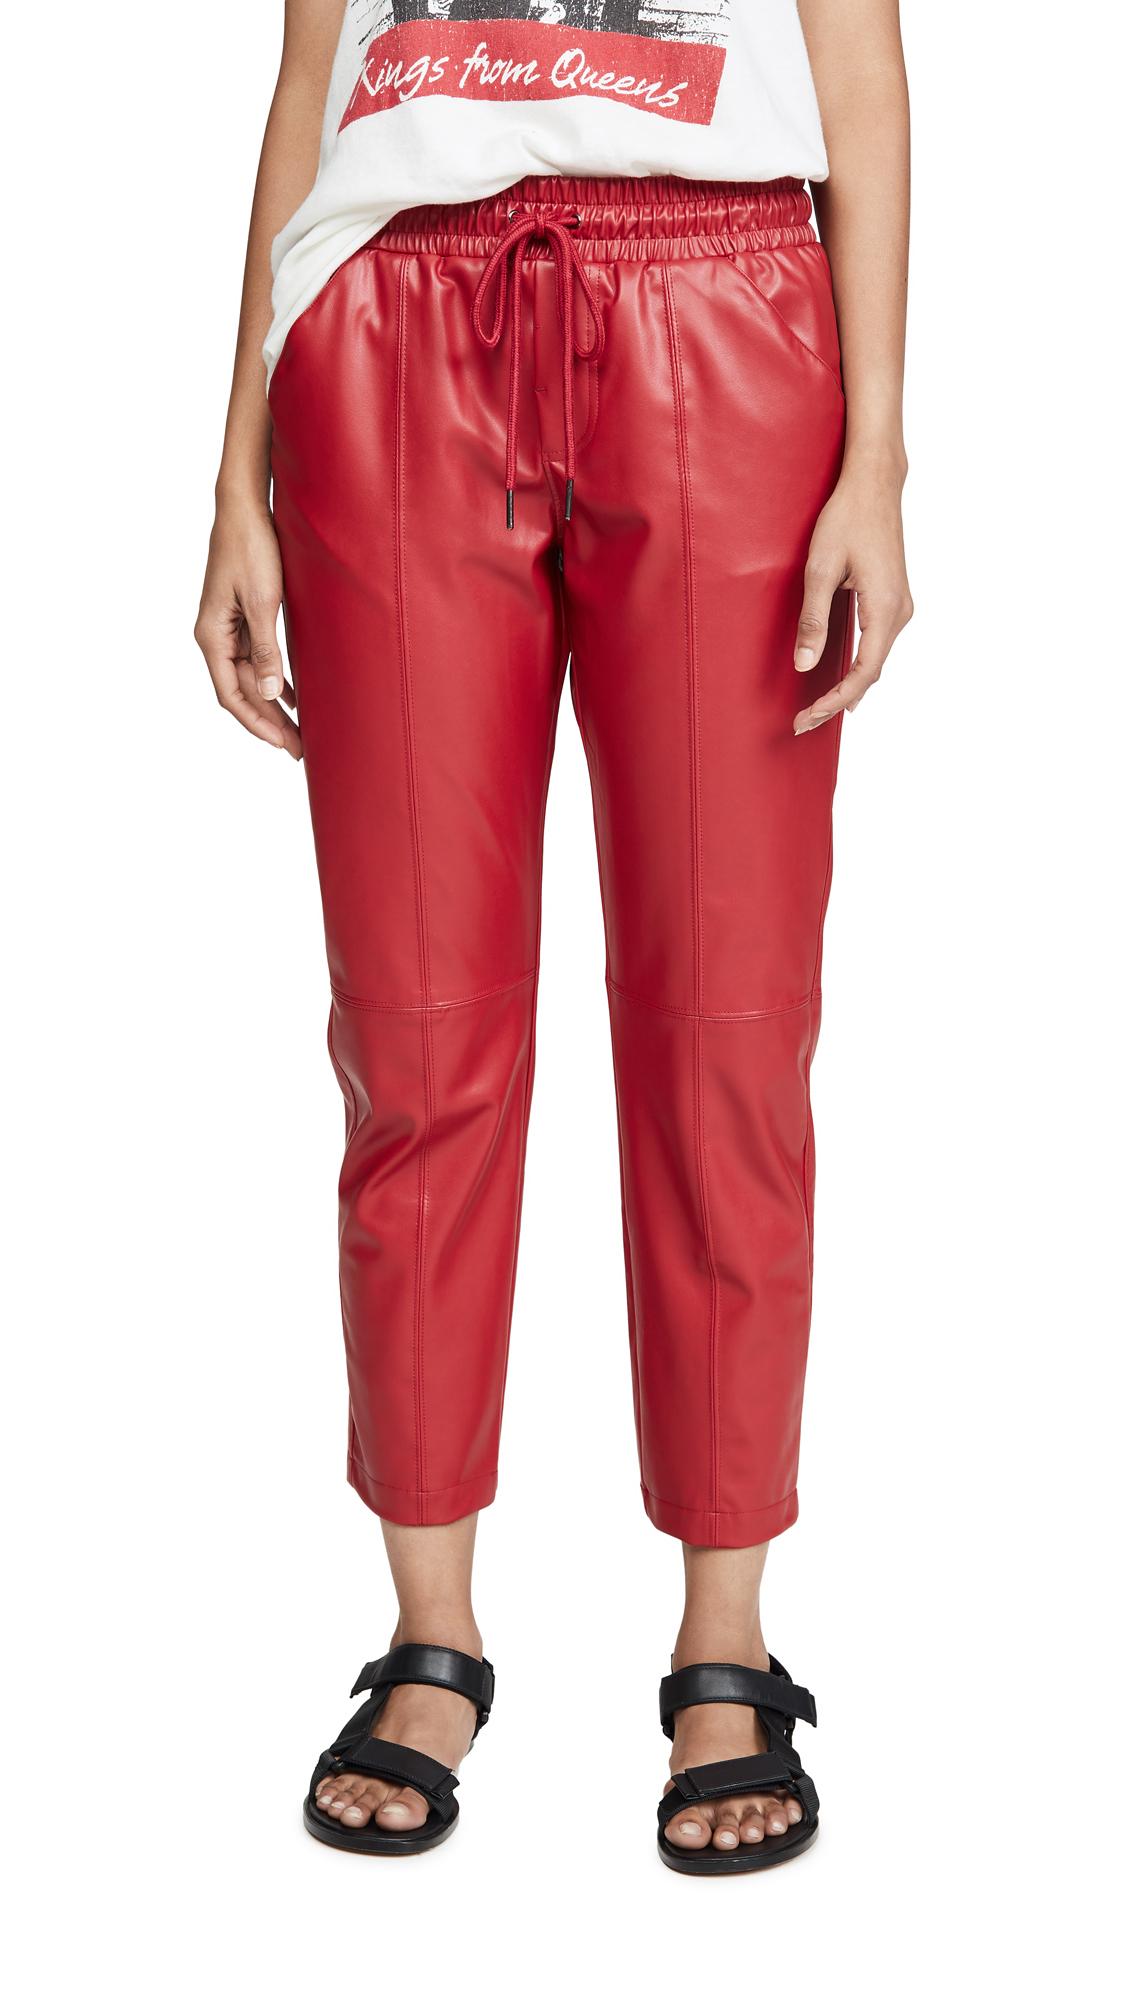 David Lerner Vegan Leather Joggers in Cherry (Red) - Lyst